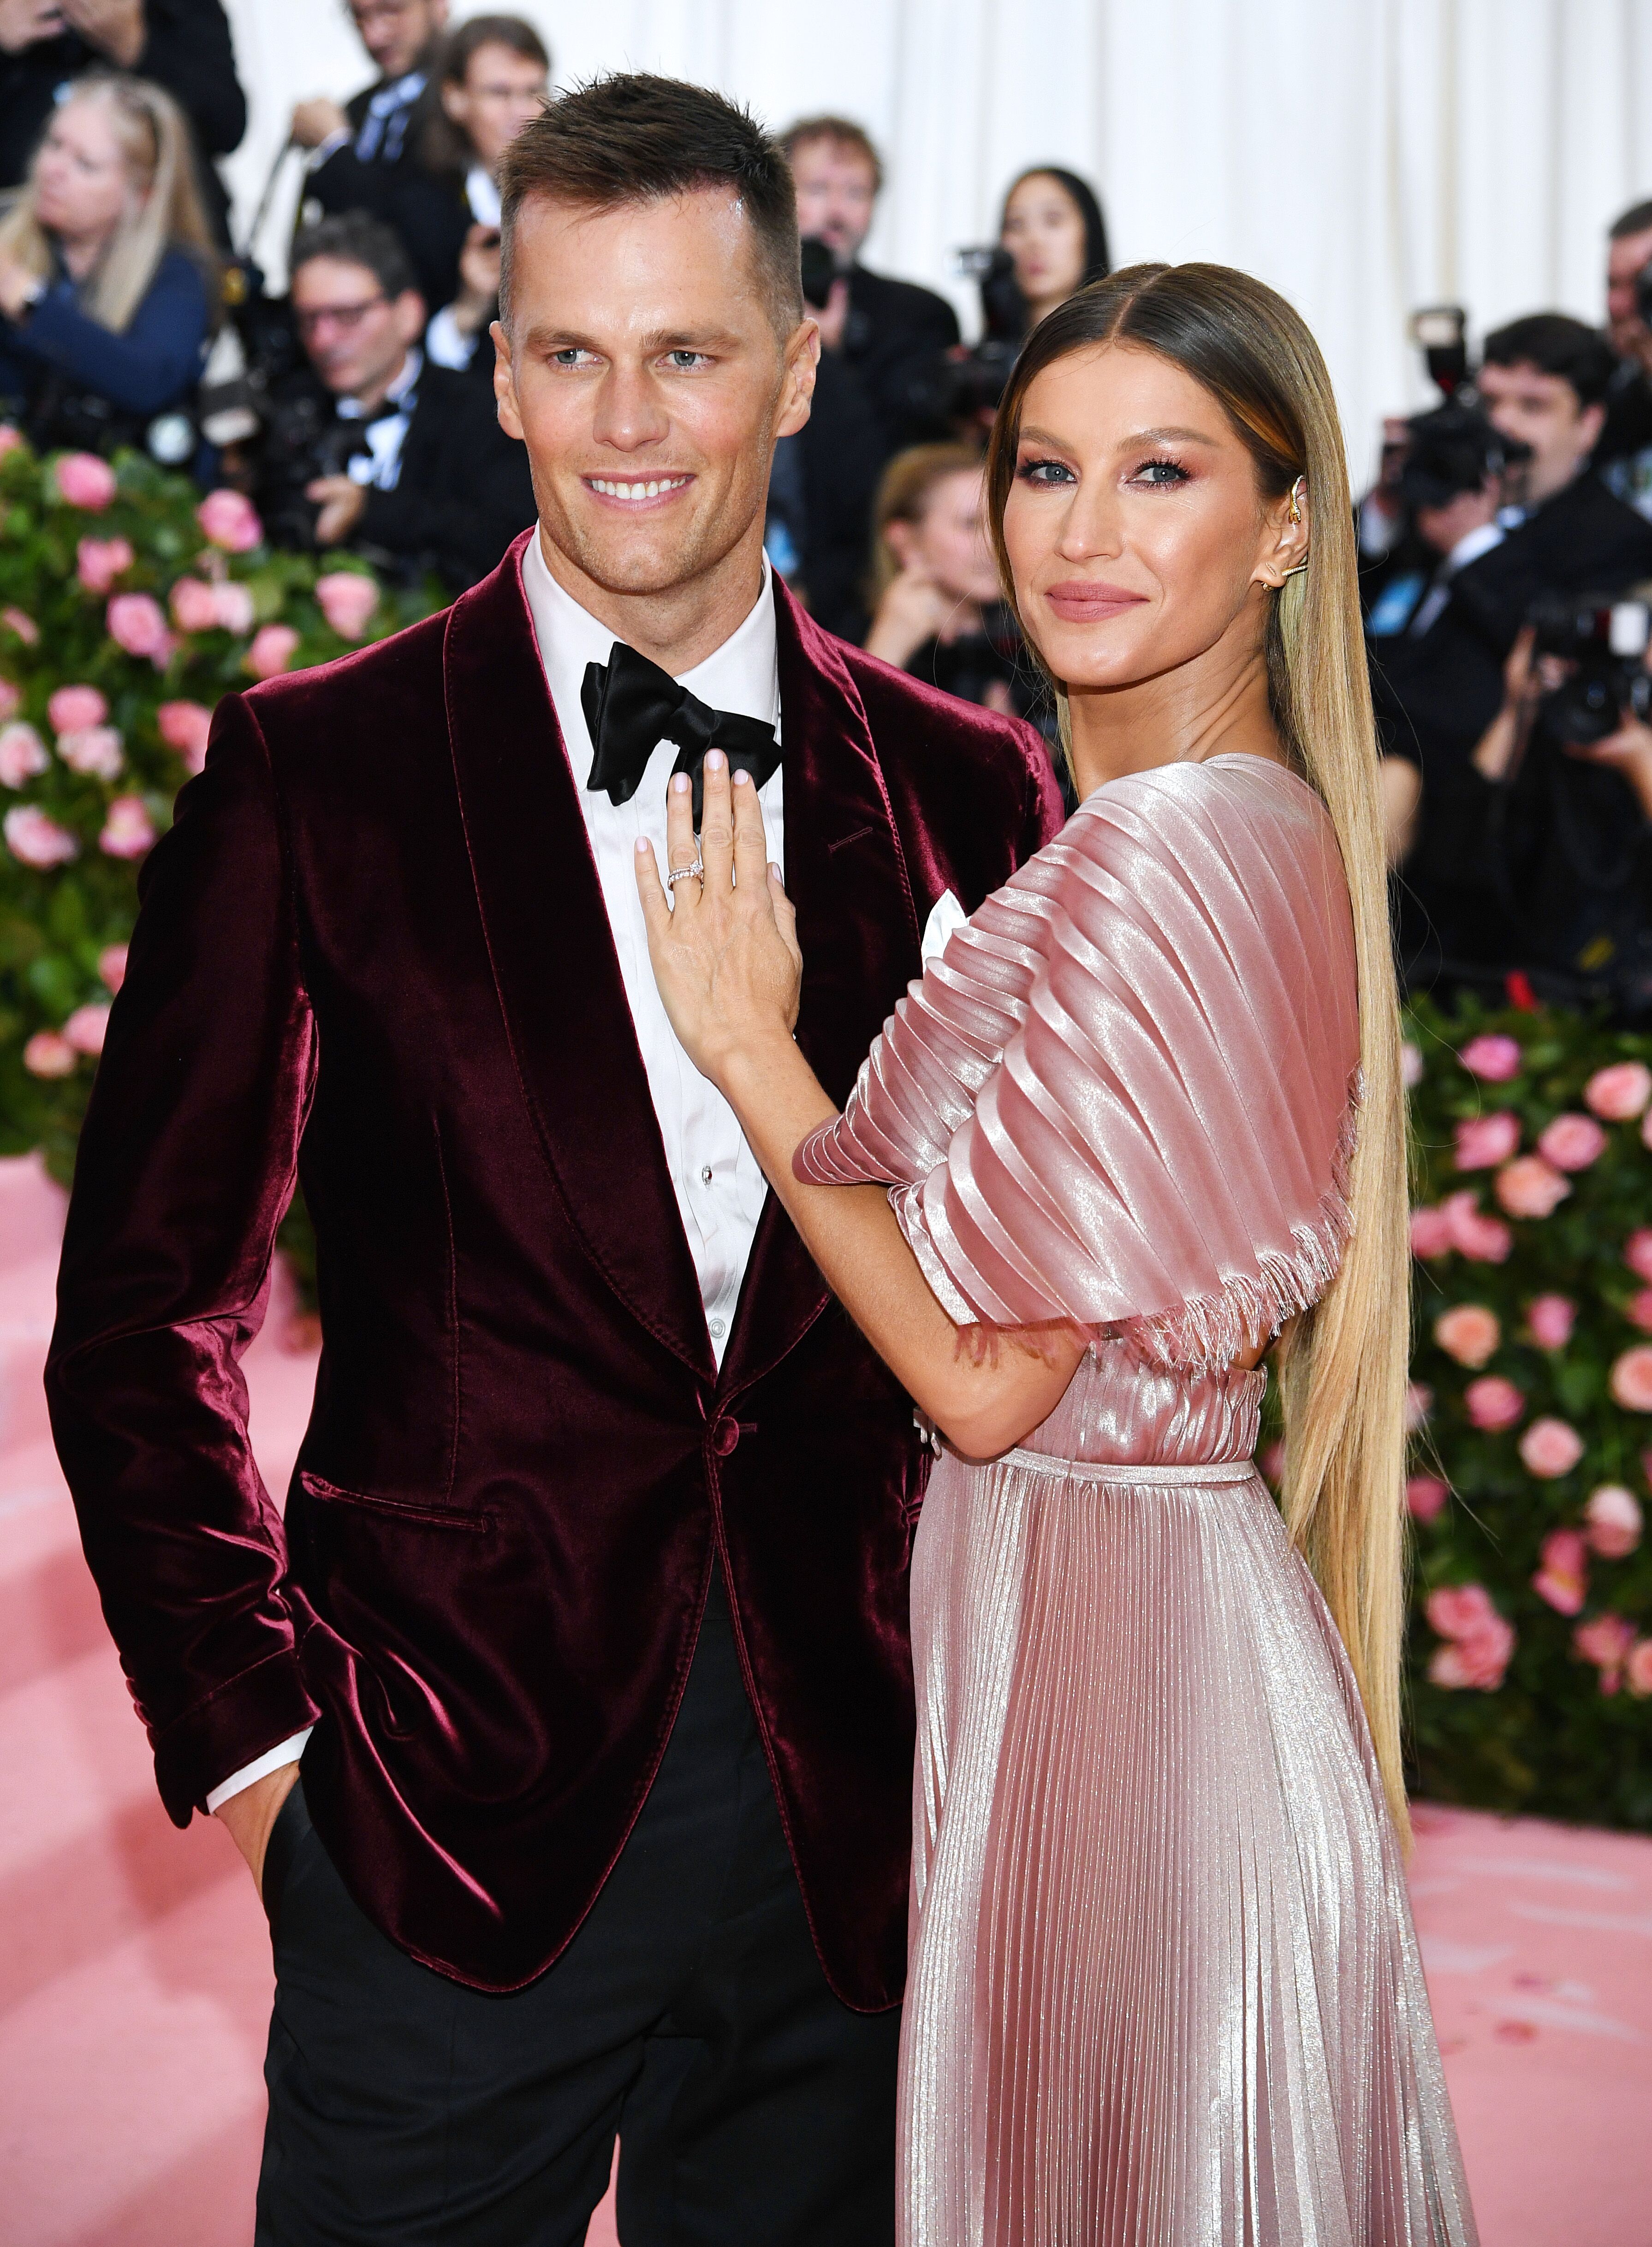  Gisele Bündchen and Tom Brady at the 2019 Met Gala in New York | Source: Getty Images